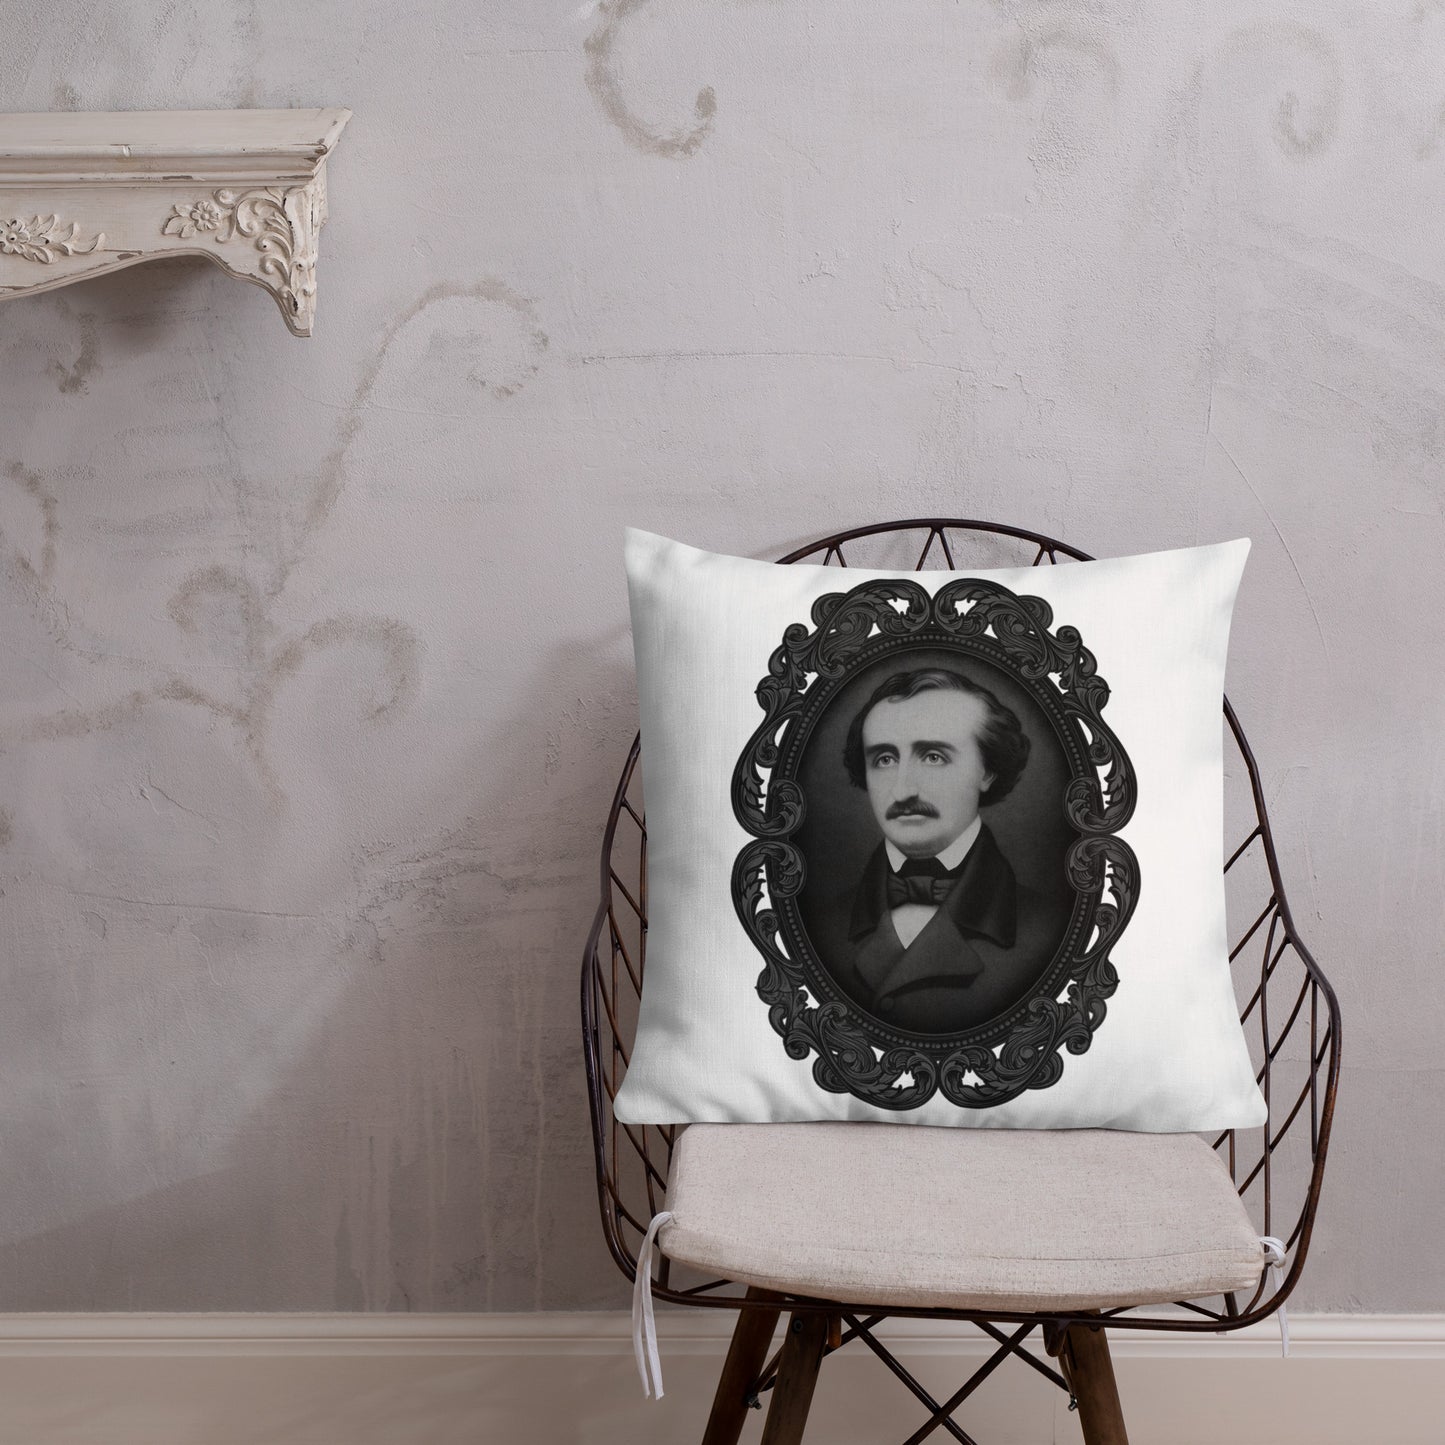 Edgar Allan Poe portrait premium pillow - add a touch of literary charm to your home decor. 22x22